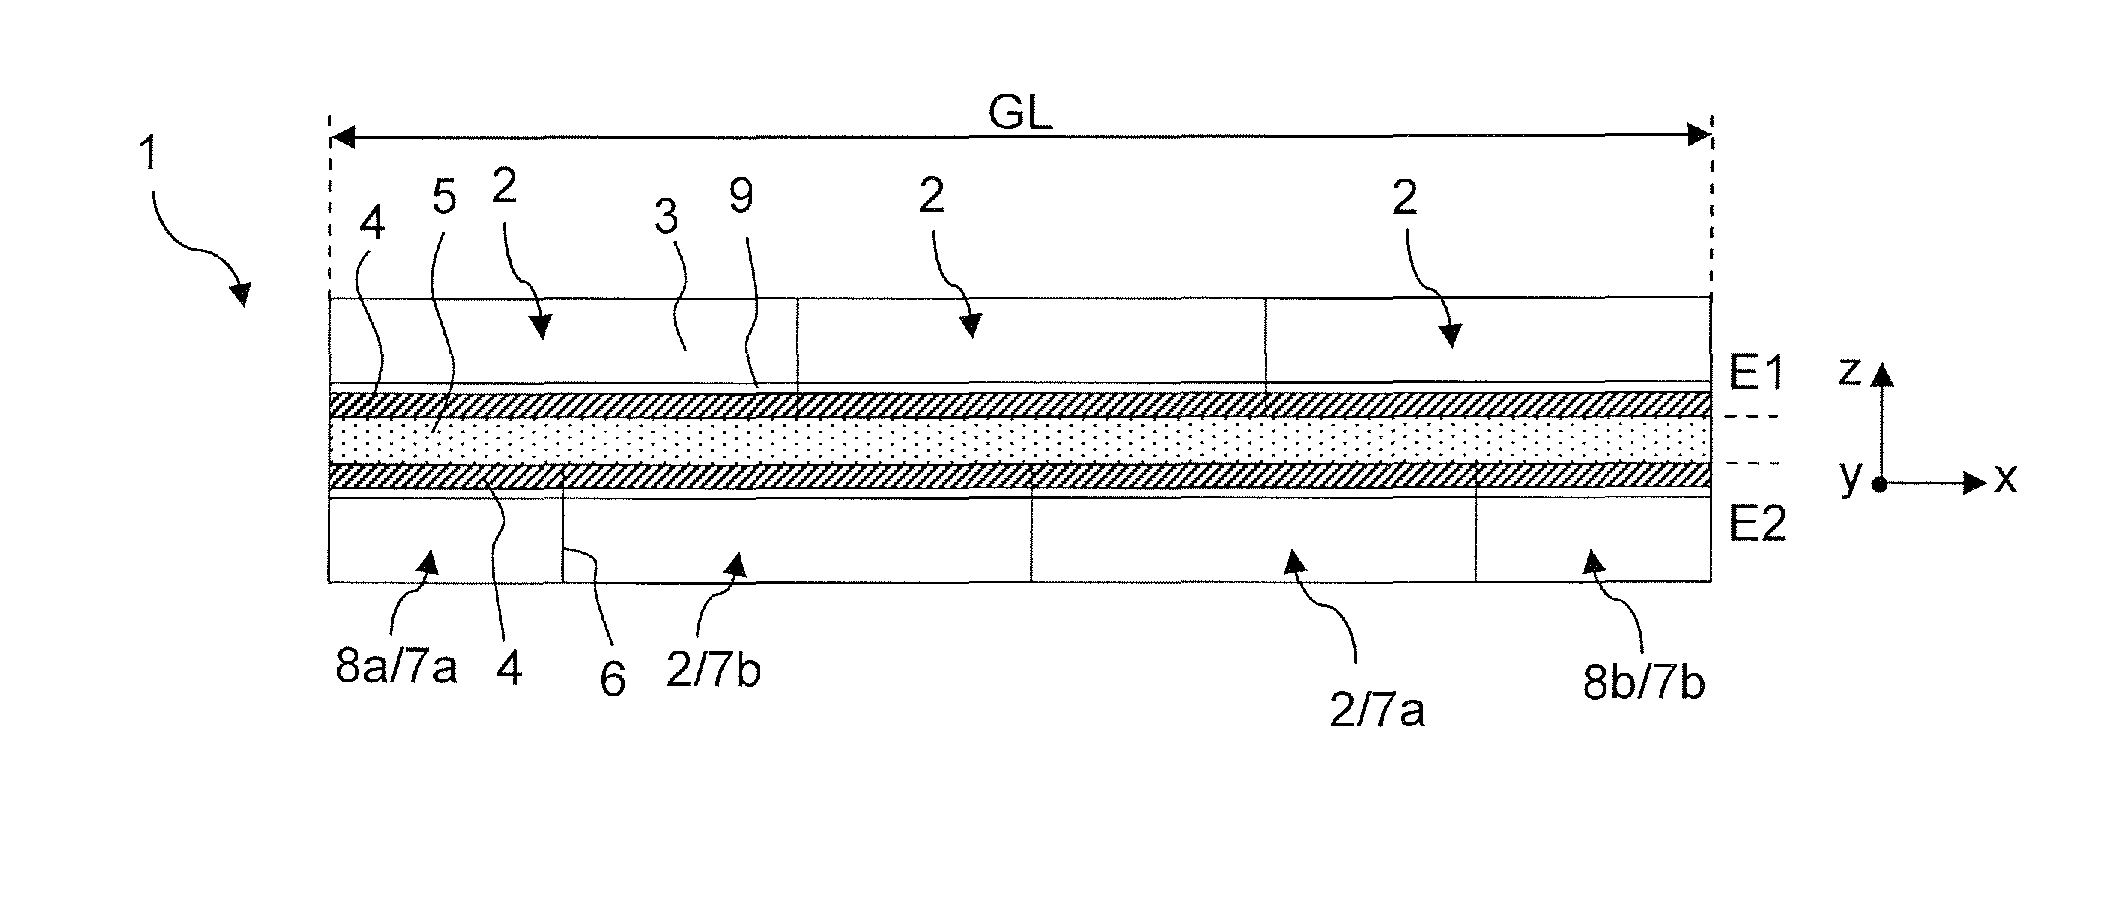 NMR Spectrometer comprising a superconducting magnetic coil having windings composed of a superconductor structure having strip pieces chained together